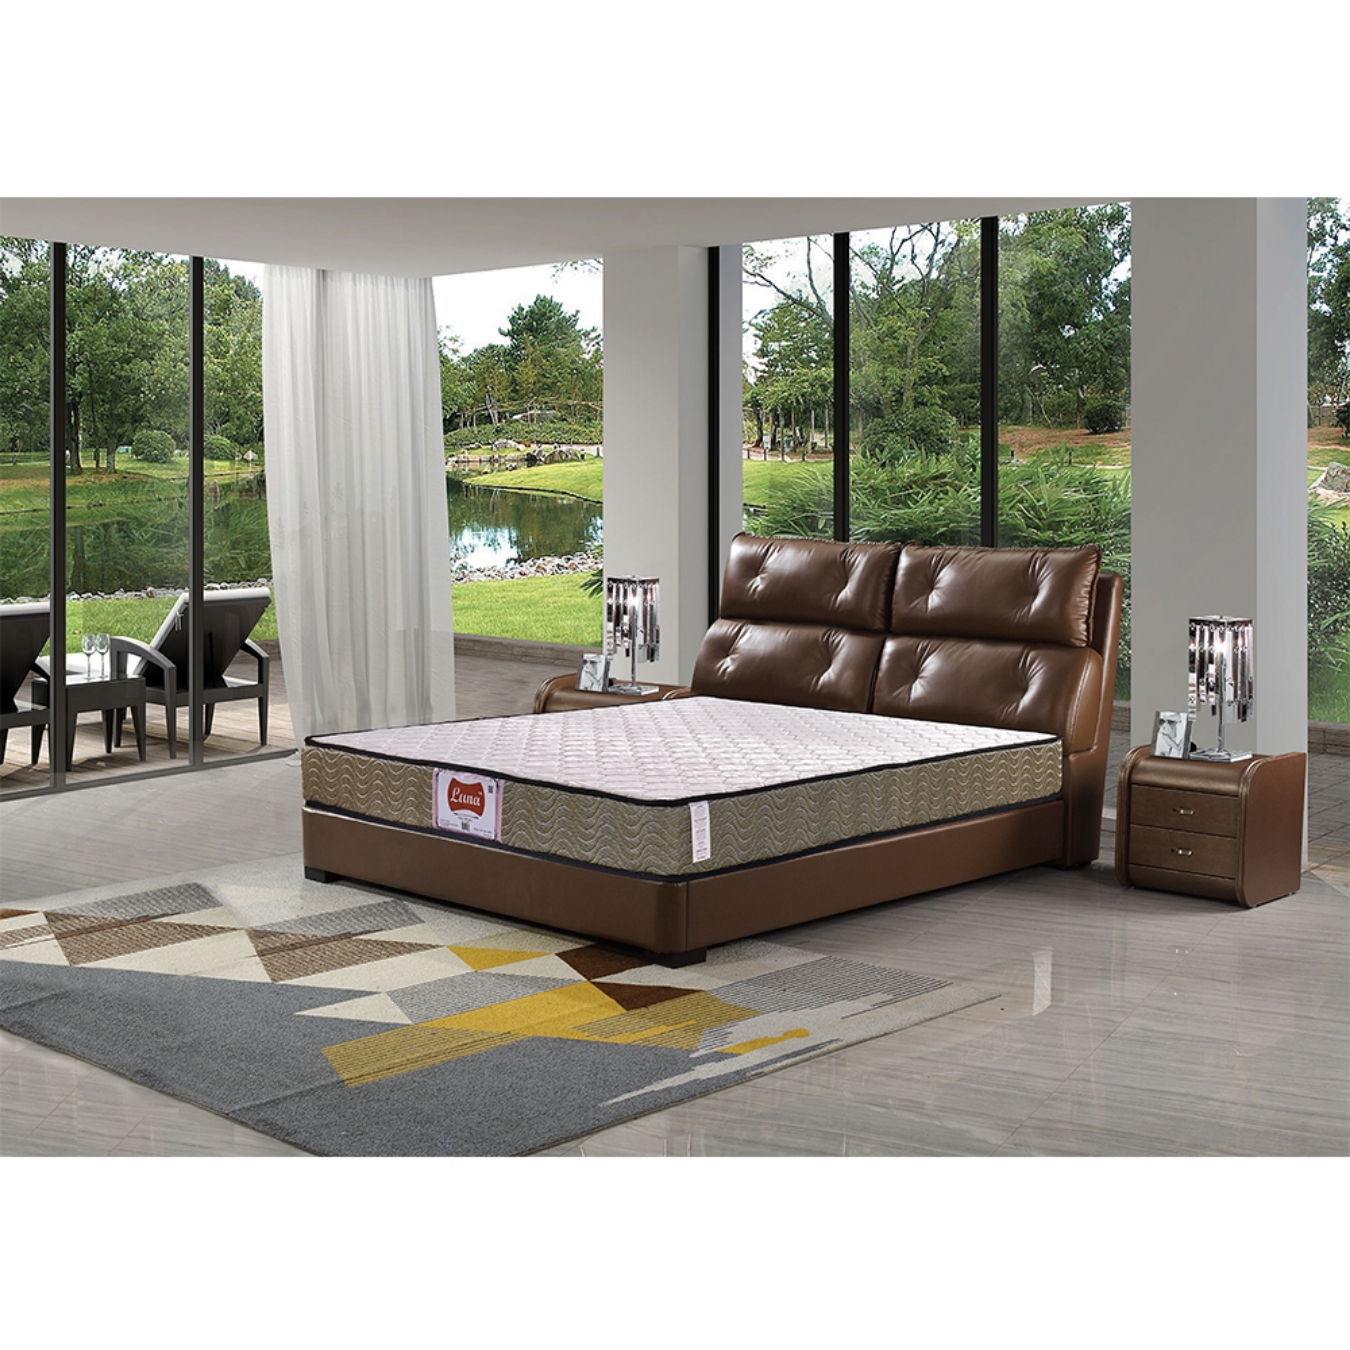 Luna 138 Bonnell Spring Box mattress was designed to be affordable and super comfortable too.